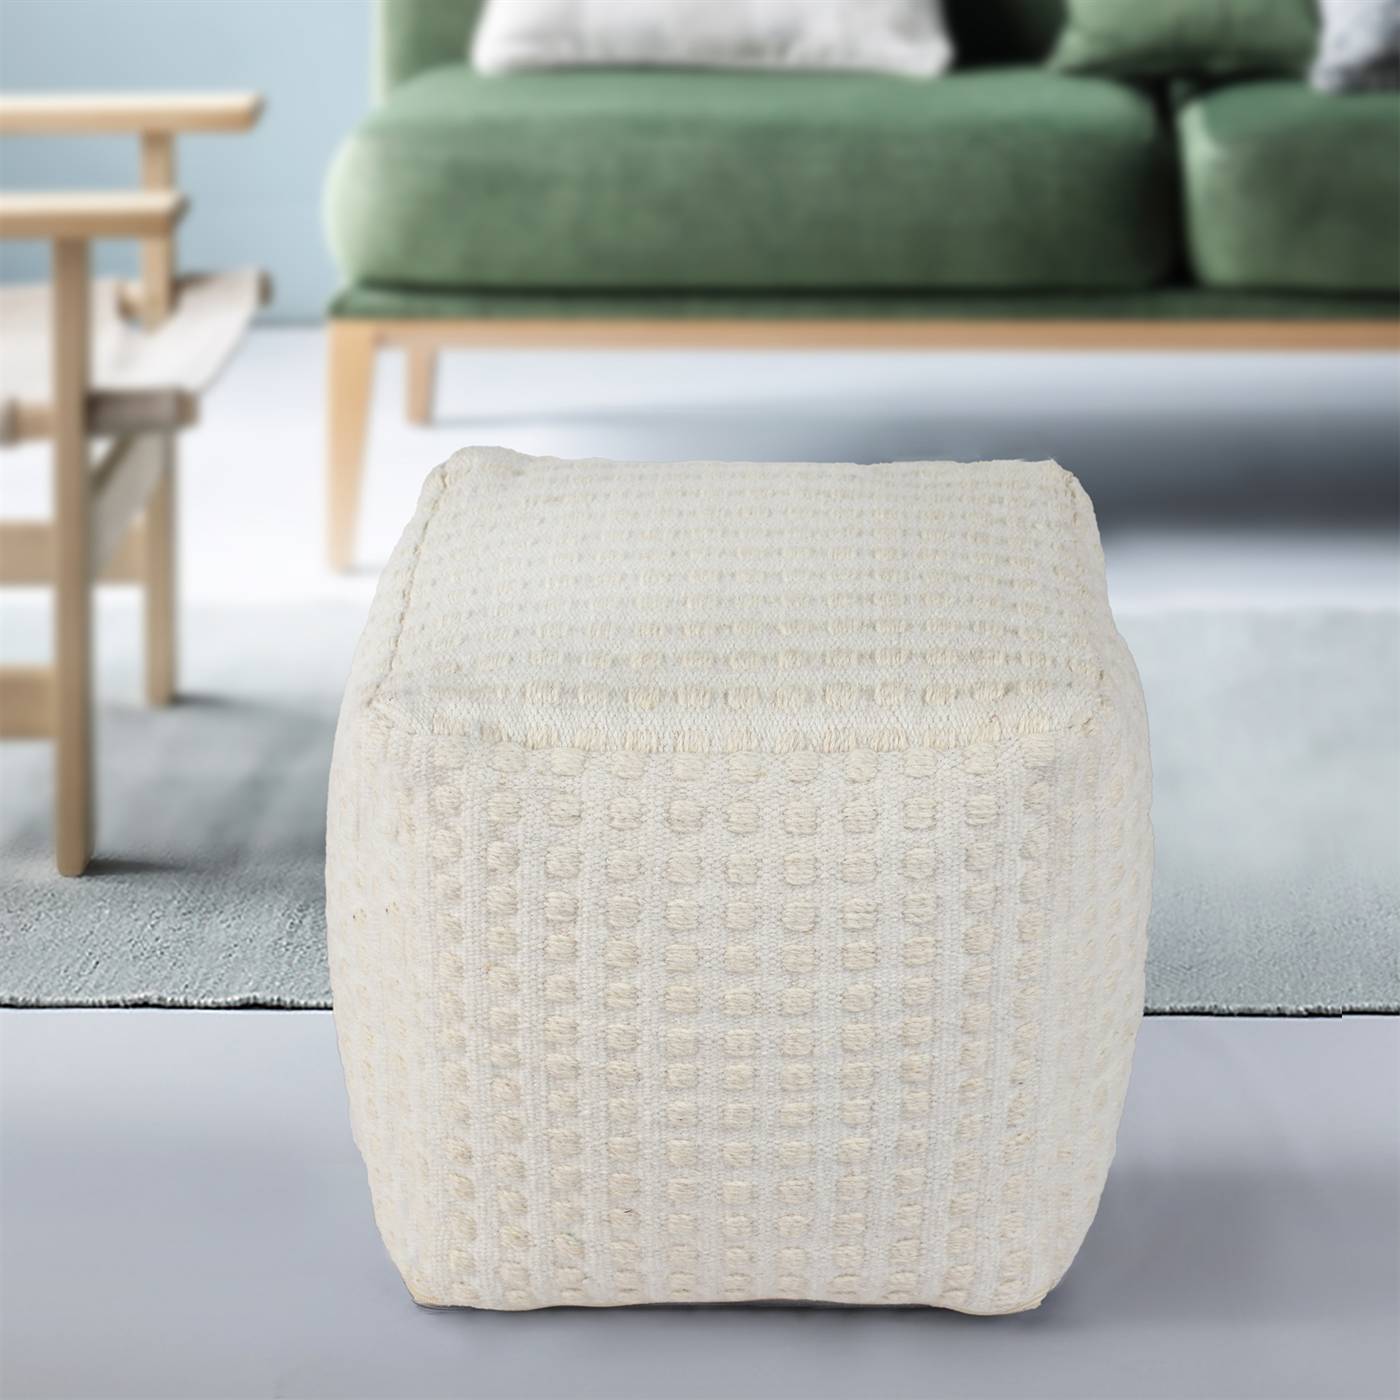 Goliad Pouf, 40x40x40 cm, Natural White, Wool, Hand Woven, Pitloom, Flat Weave